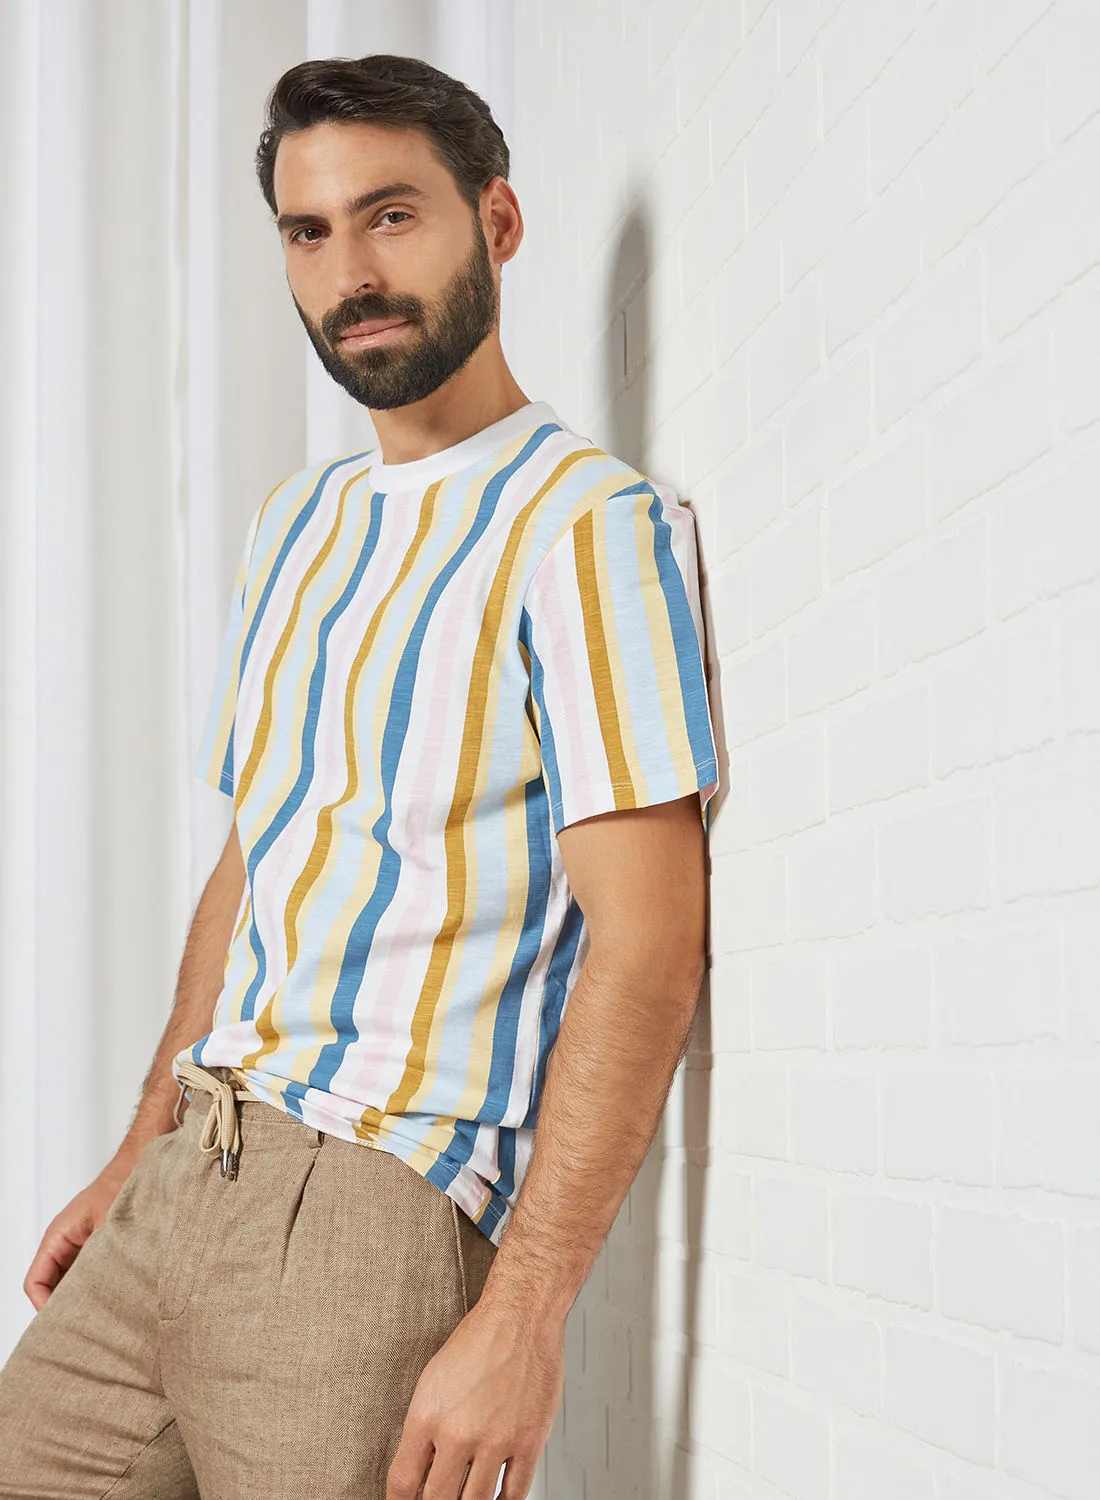 STATE 8 All-Over Stripe T-Shirt Baby Blue/Sand Stripes